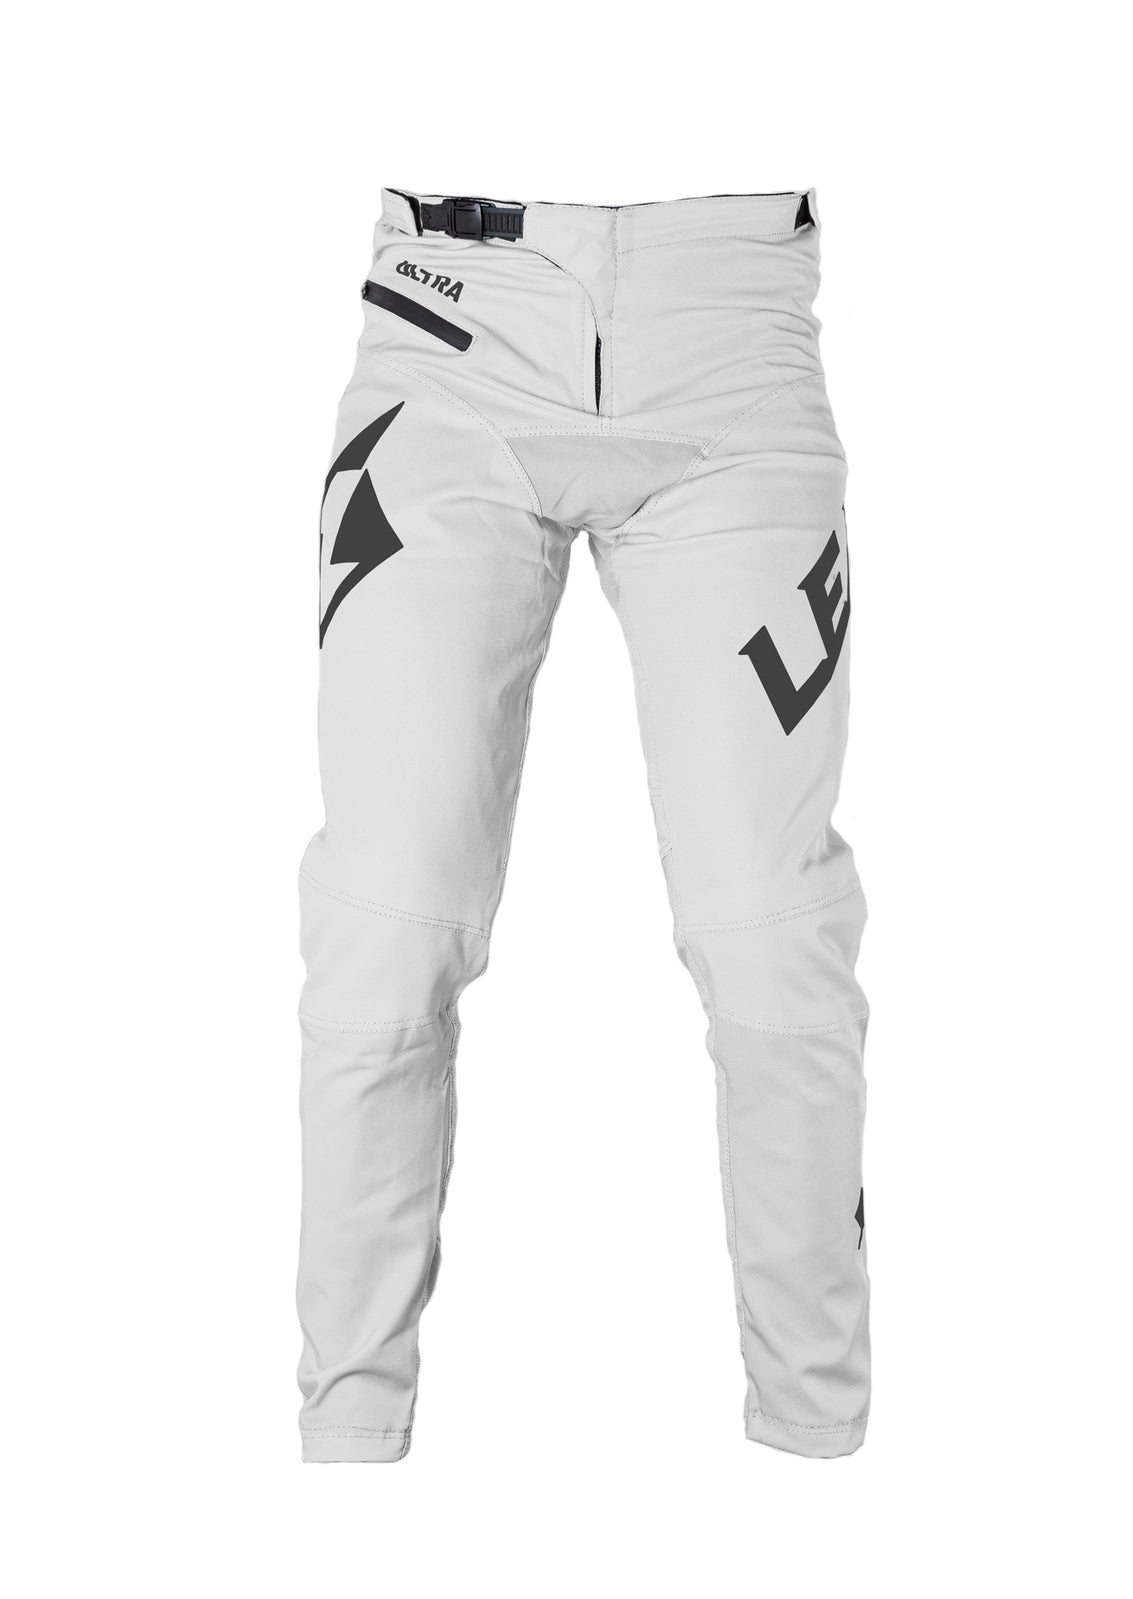 A white and black Lead Ultra Youth Pant, reducing drag for an ultra race.